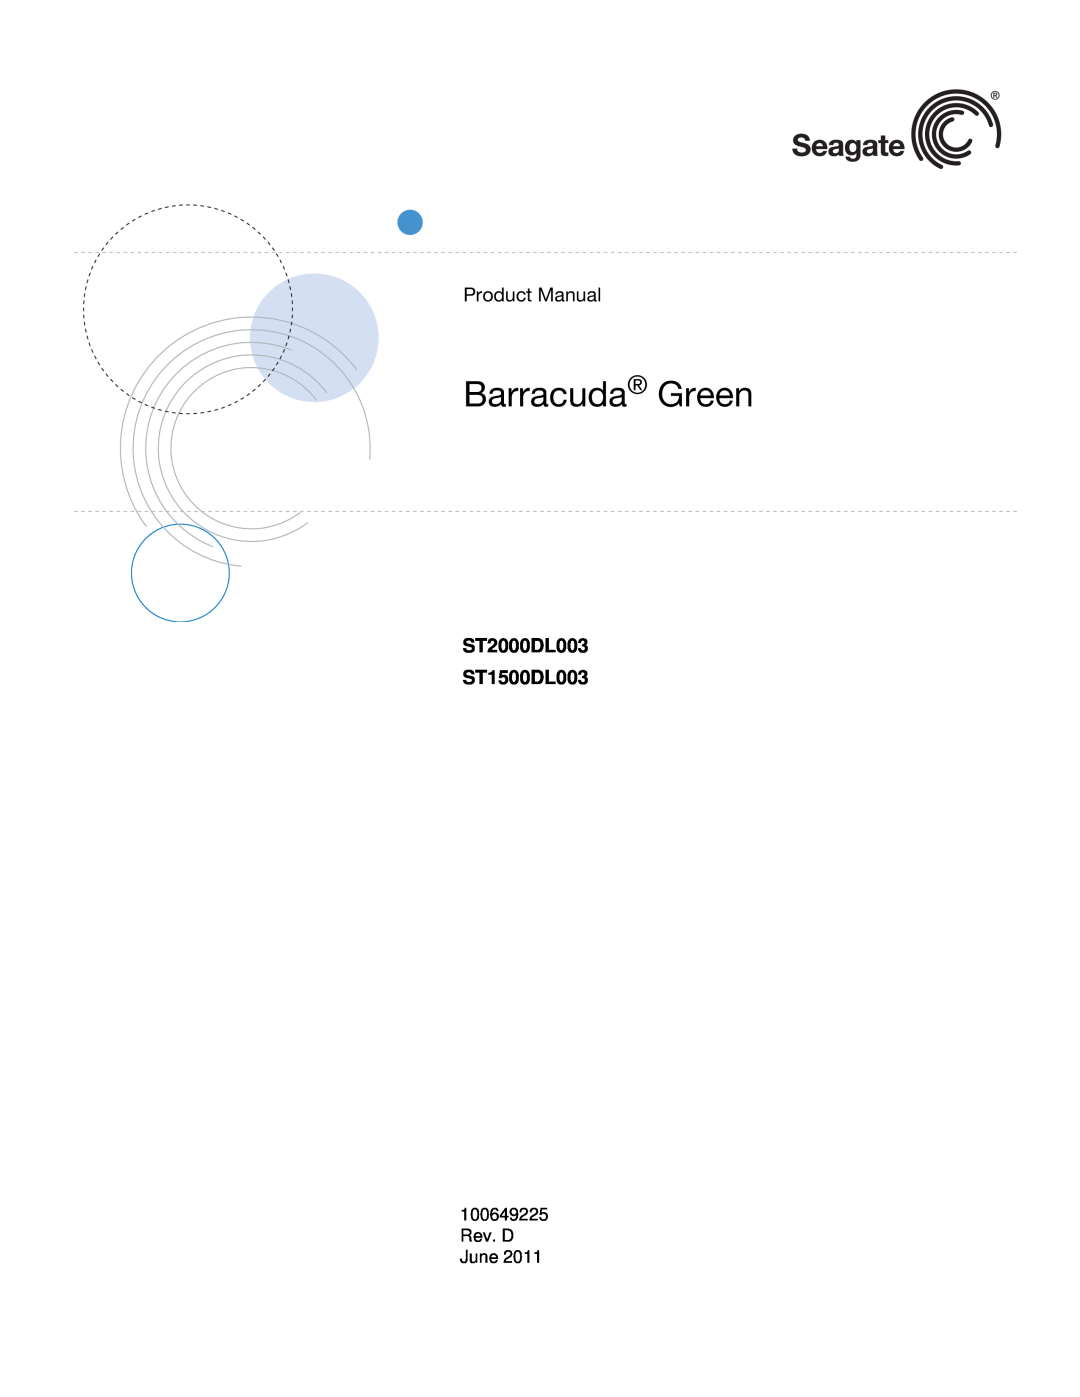 Seagate manual Barracuda Green, Product Manual, ST2000DL003 ST1500DL003 